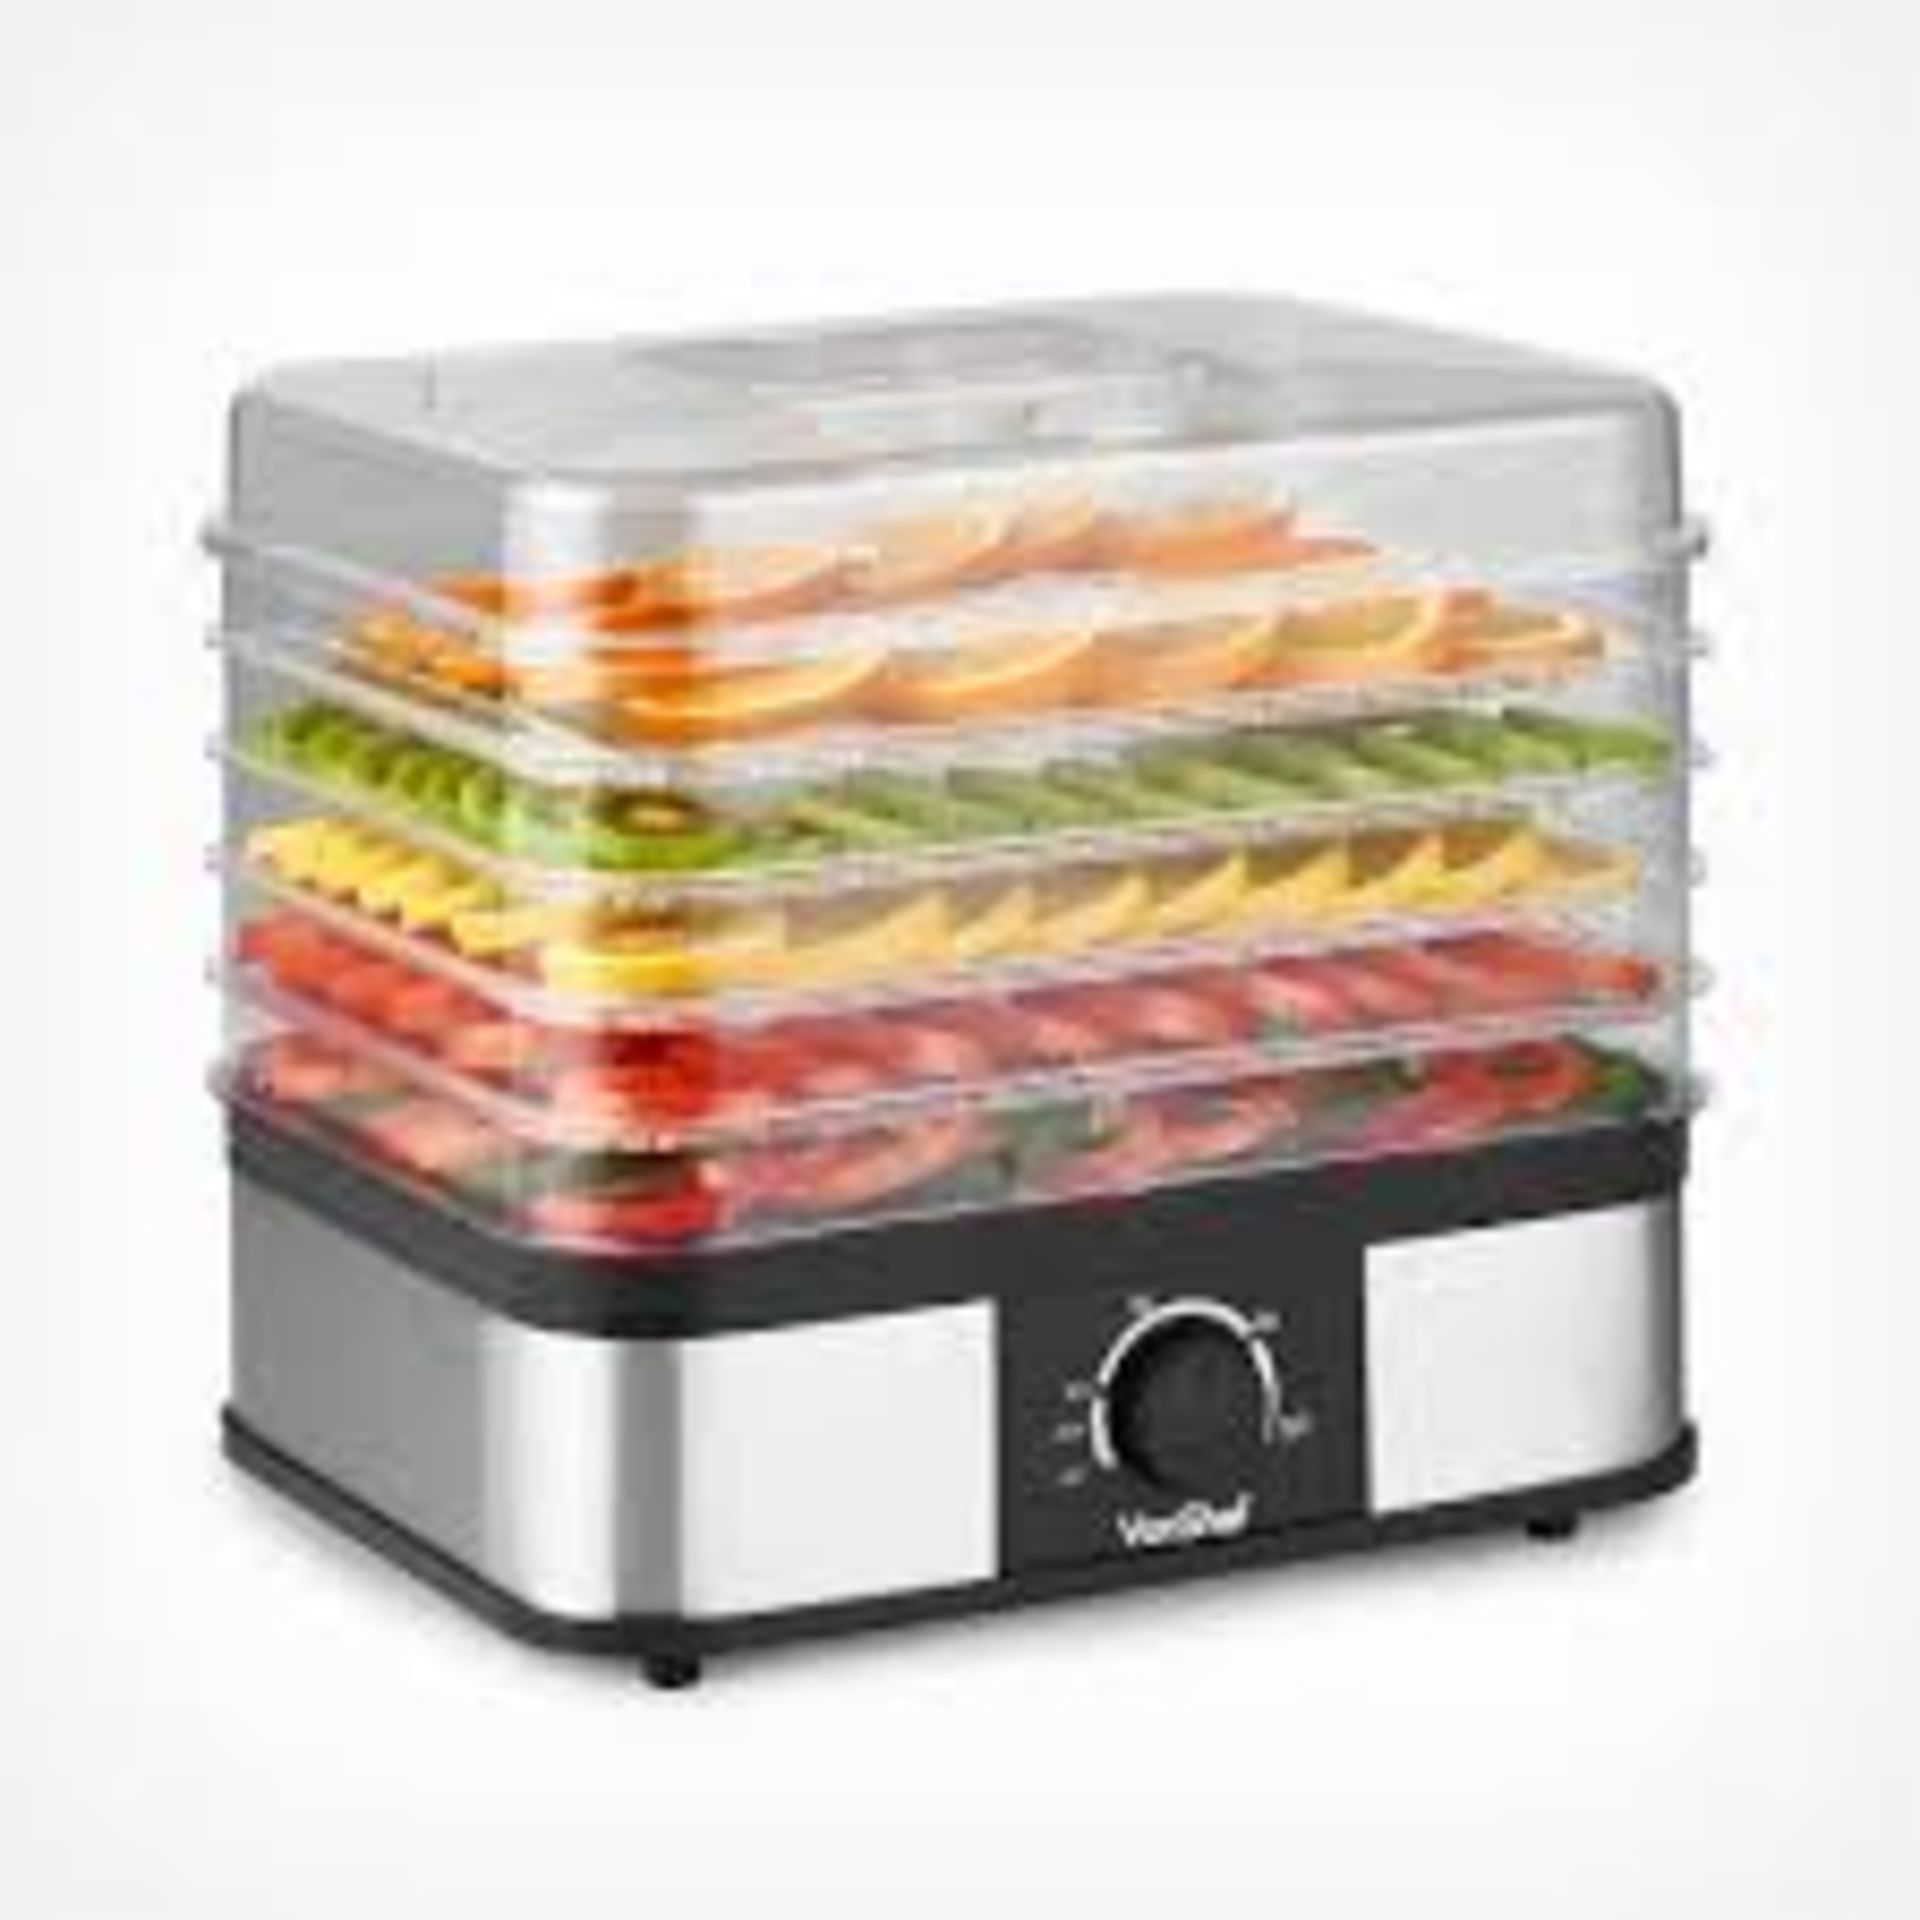 5 Tier Food Dehydrator. - BW. Ideal for fruits, meats, fish, vegetables, greens, herbs, and